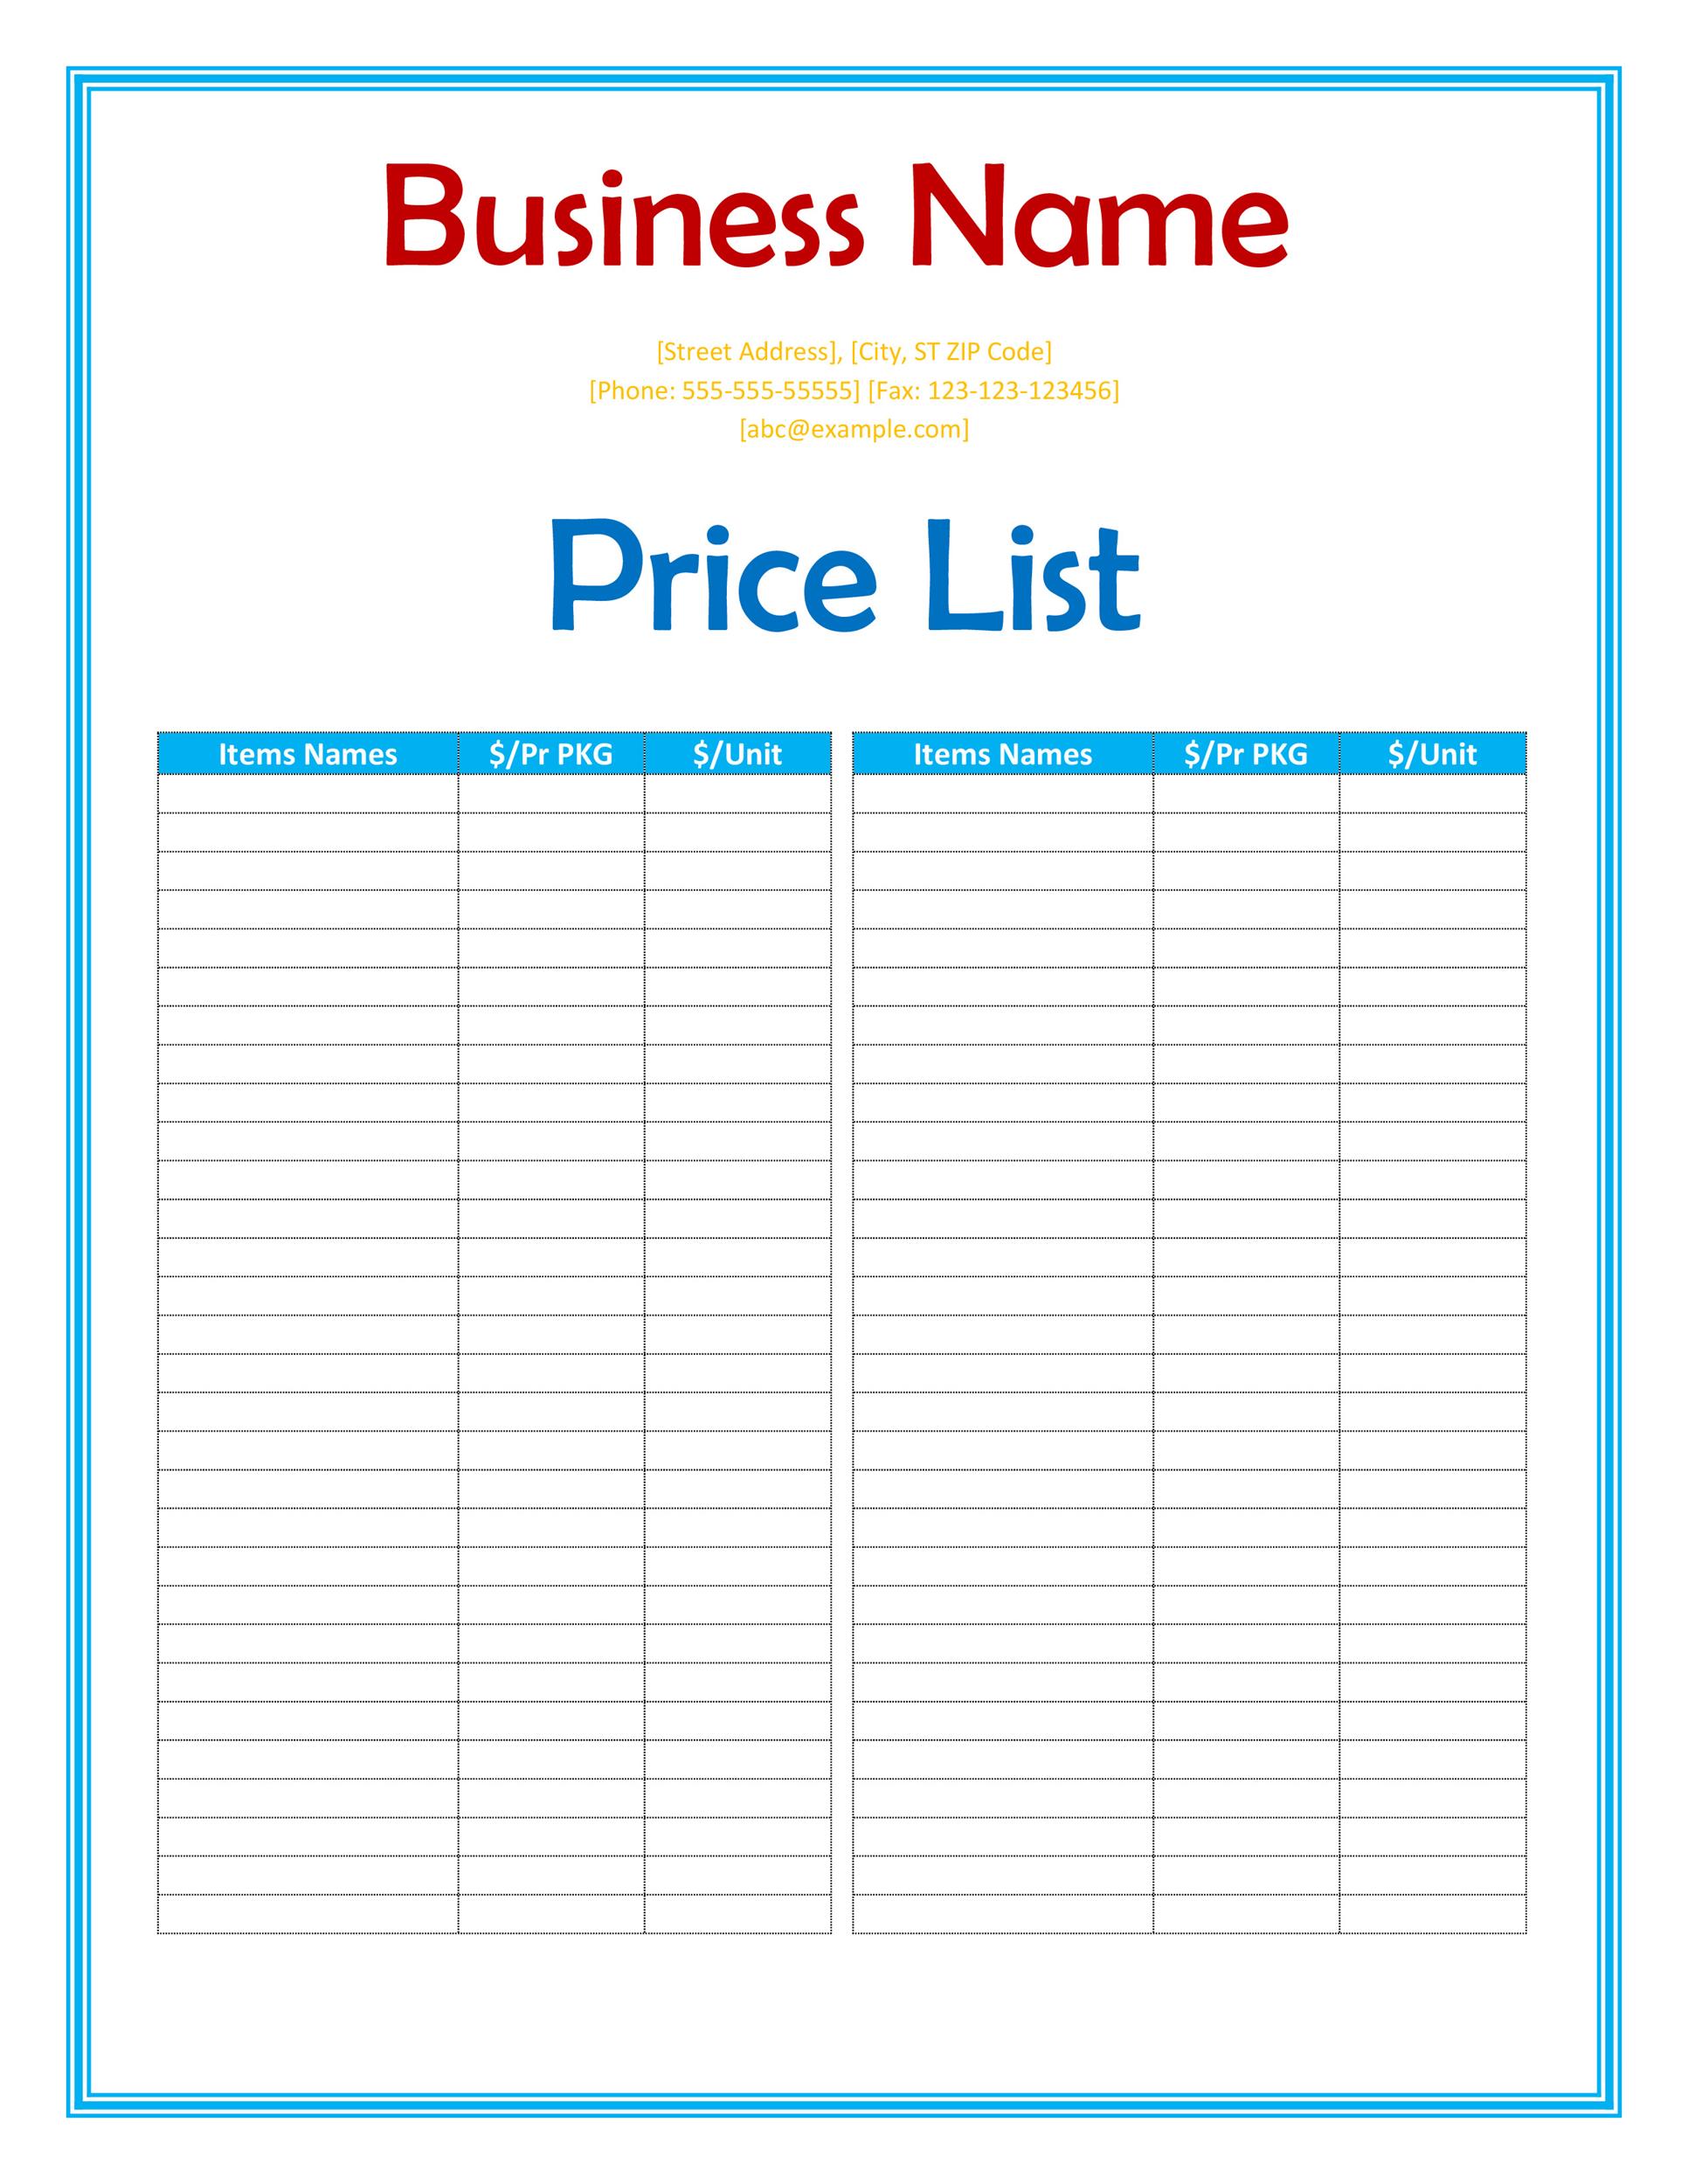 Price List Template Word from templatelab.com